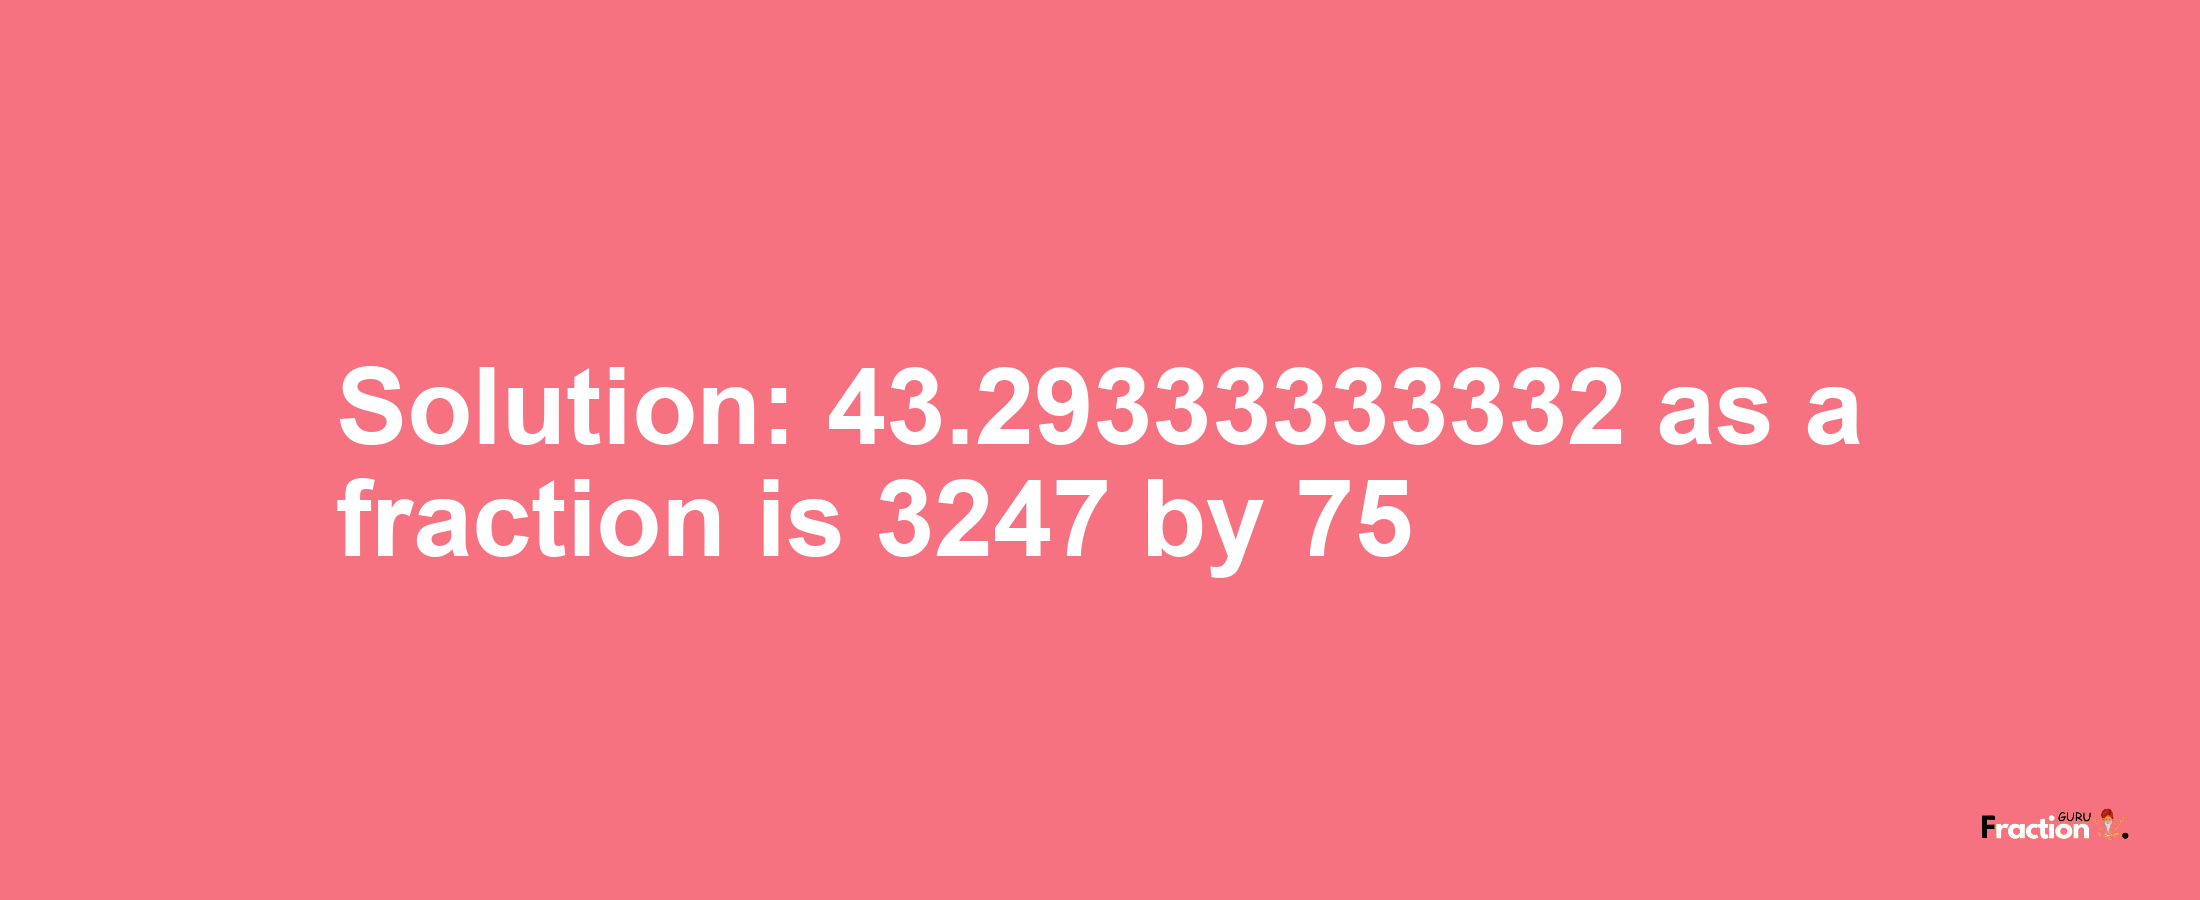 Solution:43.29333333332 as a fraction is 3247/75